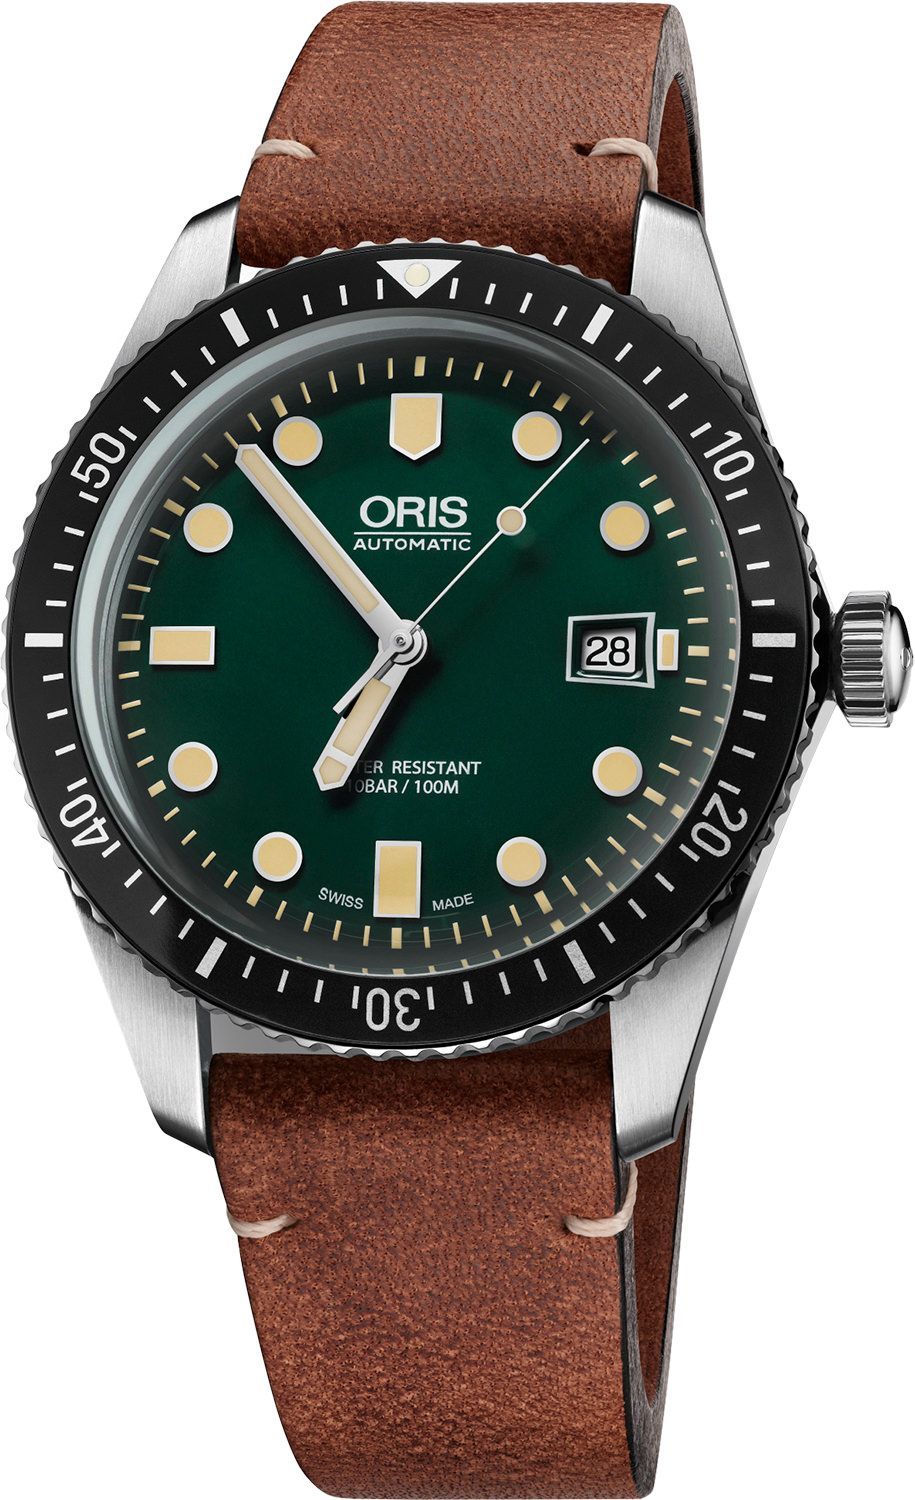 Oris Divers Divers Sixty-Five Green Dial 42 mm Automatic Watch For Men - 1